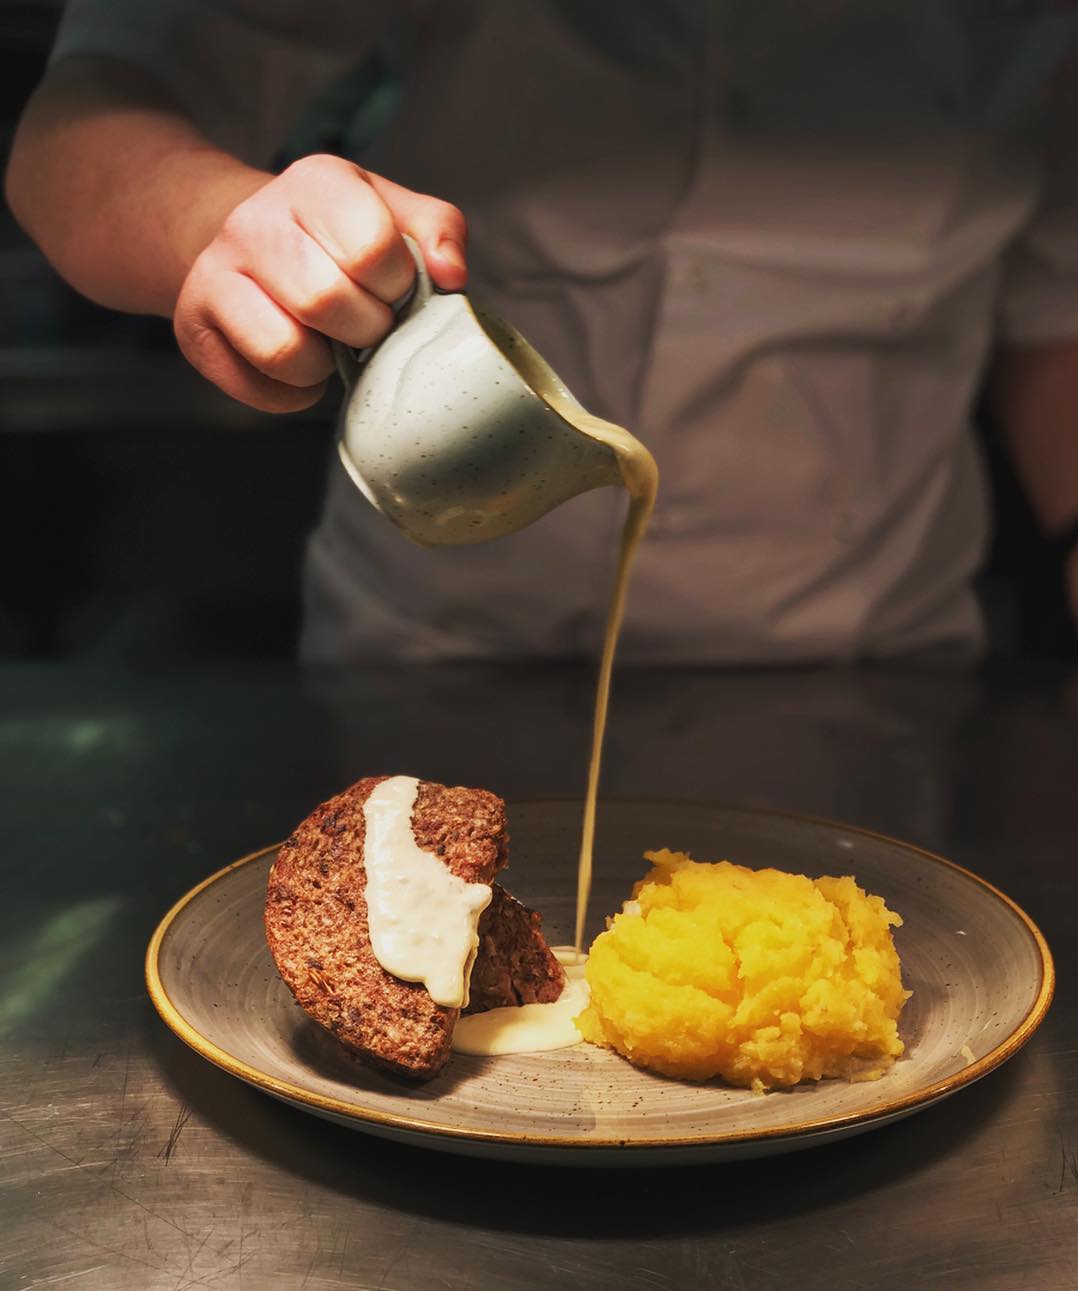 It’s Burns Night Tonight so we’ve got @cranstons_1914 Haggis, Neeps and Tatties as our special today! Sometimes the simple things are the best! 🏴󠁧󠁢󠁳󠁣󠁴󠁿
.
.
#scotland #scottish #haggis #haggisneepsandtatties #food #foodie #burnsnight #potatoes #whisky #whiskysauce #cranstons #cafeoswalds #cumbria